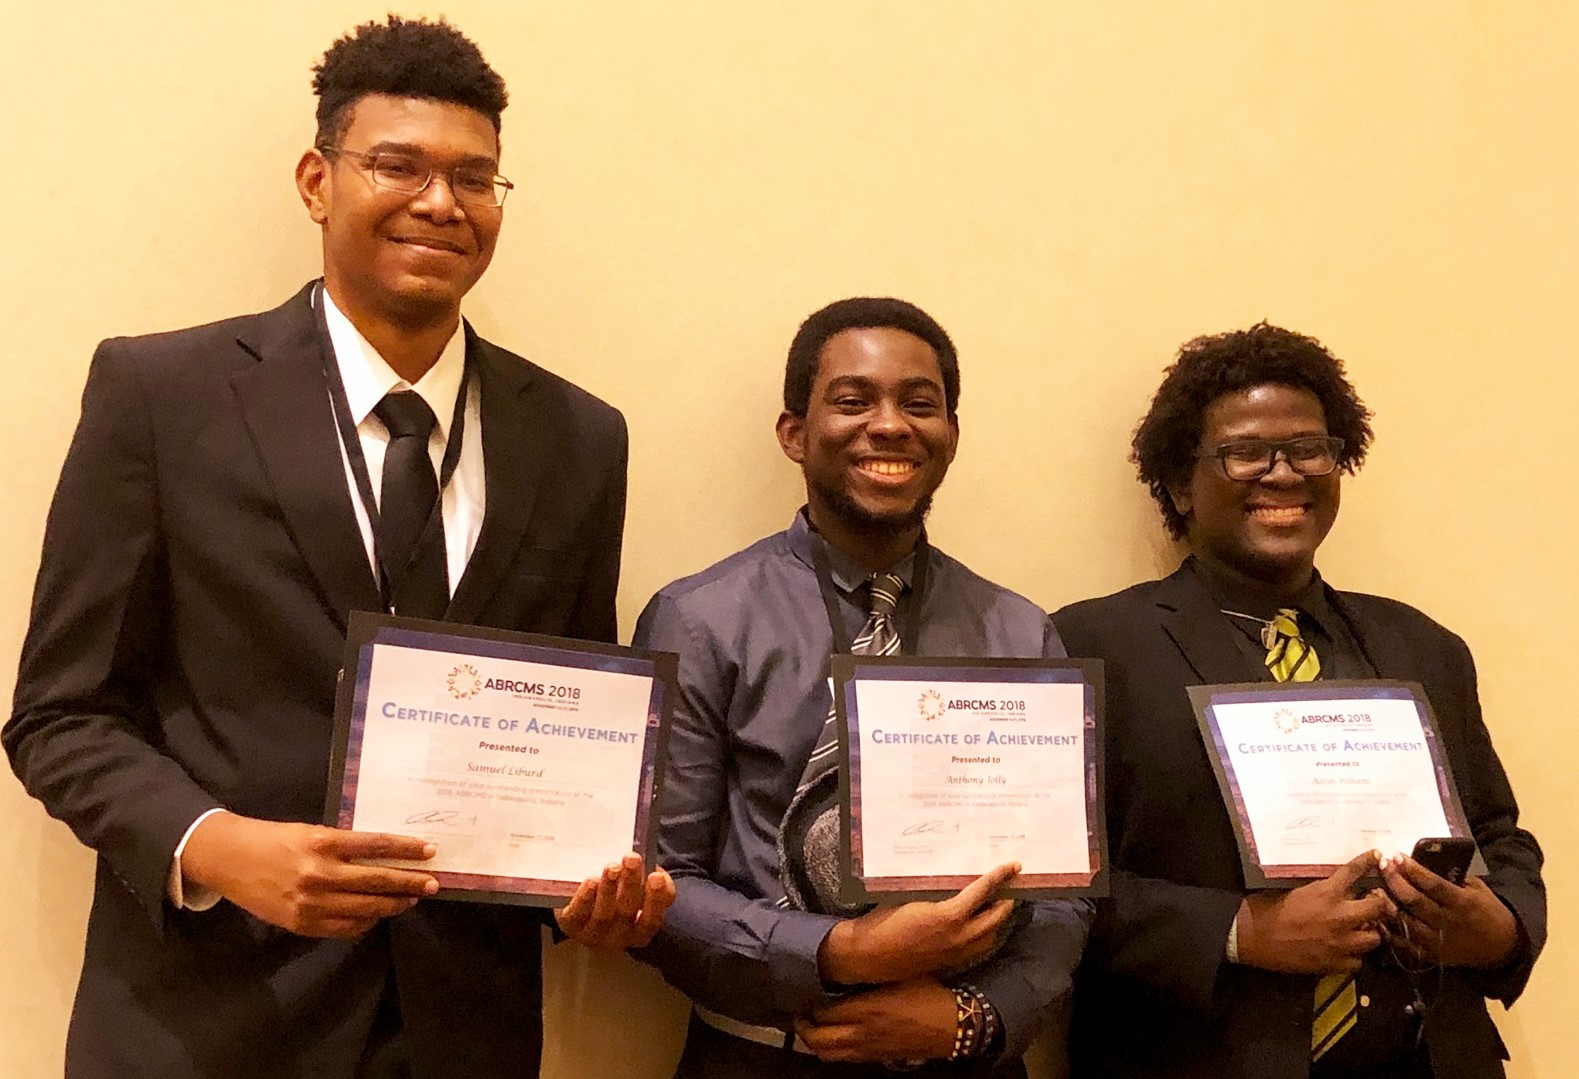 UVI Students Take Top Honors at National Biomedical Research Conference